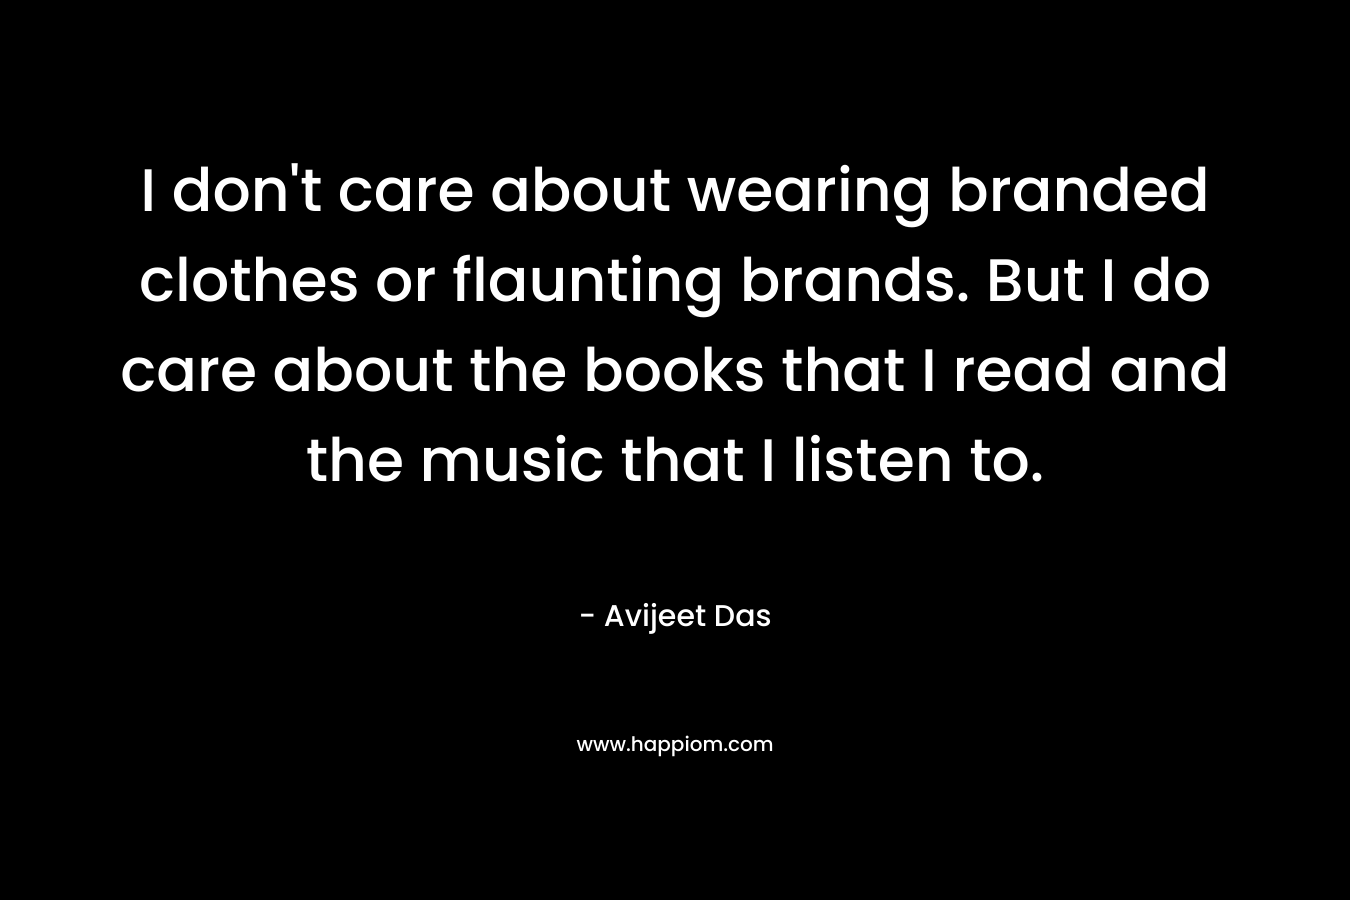 I don’t care about wearing branded clothes or flaunting brands. But I do care about the books that I read and the music that I listen to. – Avijeet Das